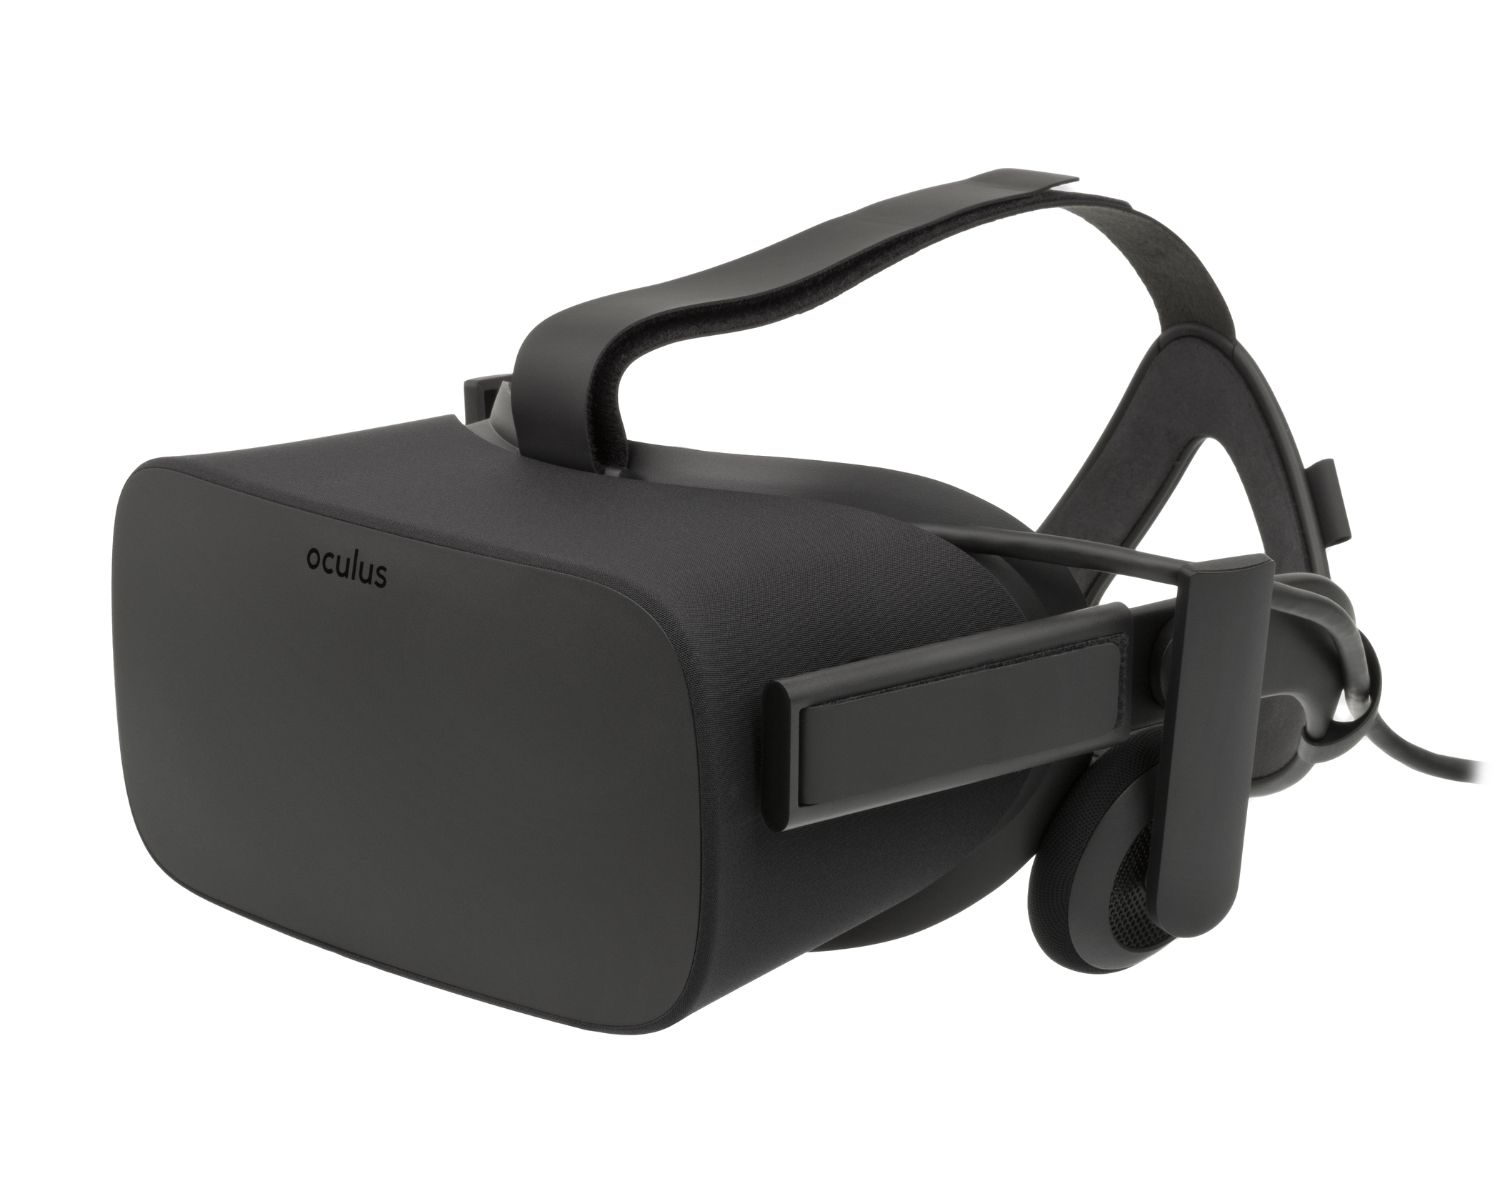 Virtual Reality Headset Review: Unbiased Analysis and Recommendations